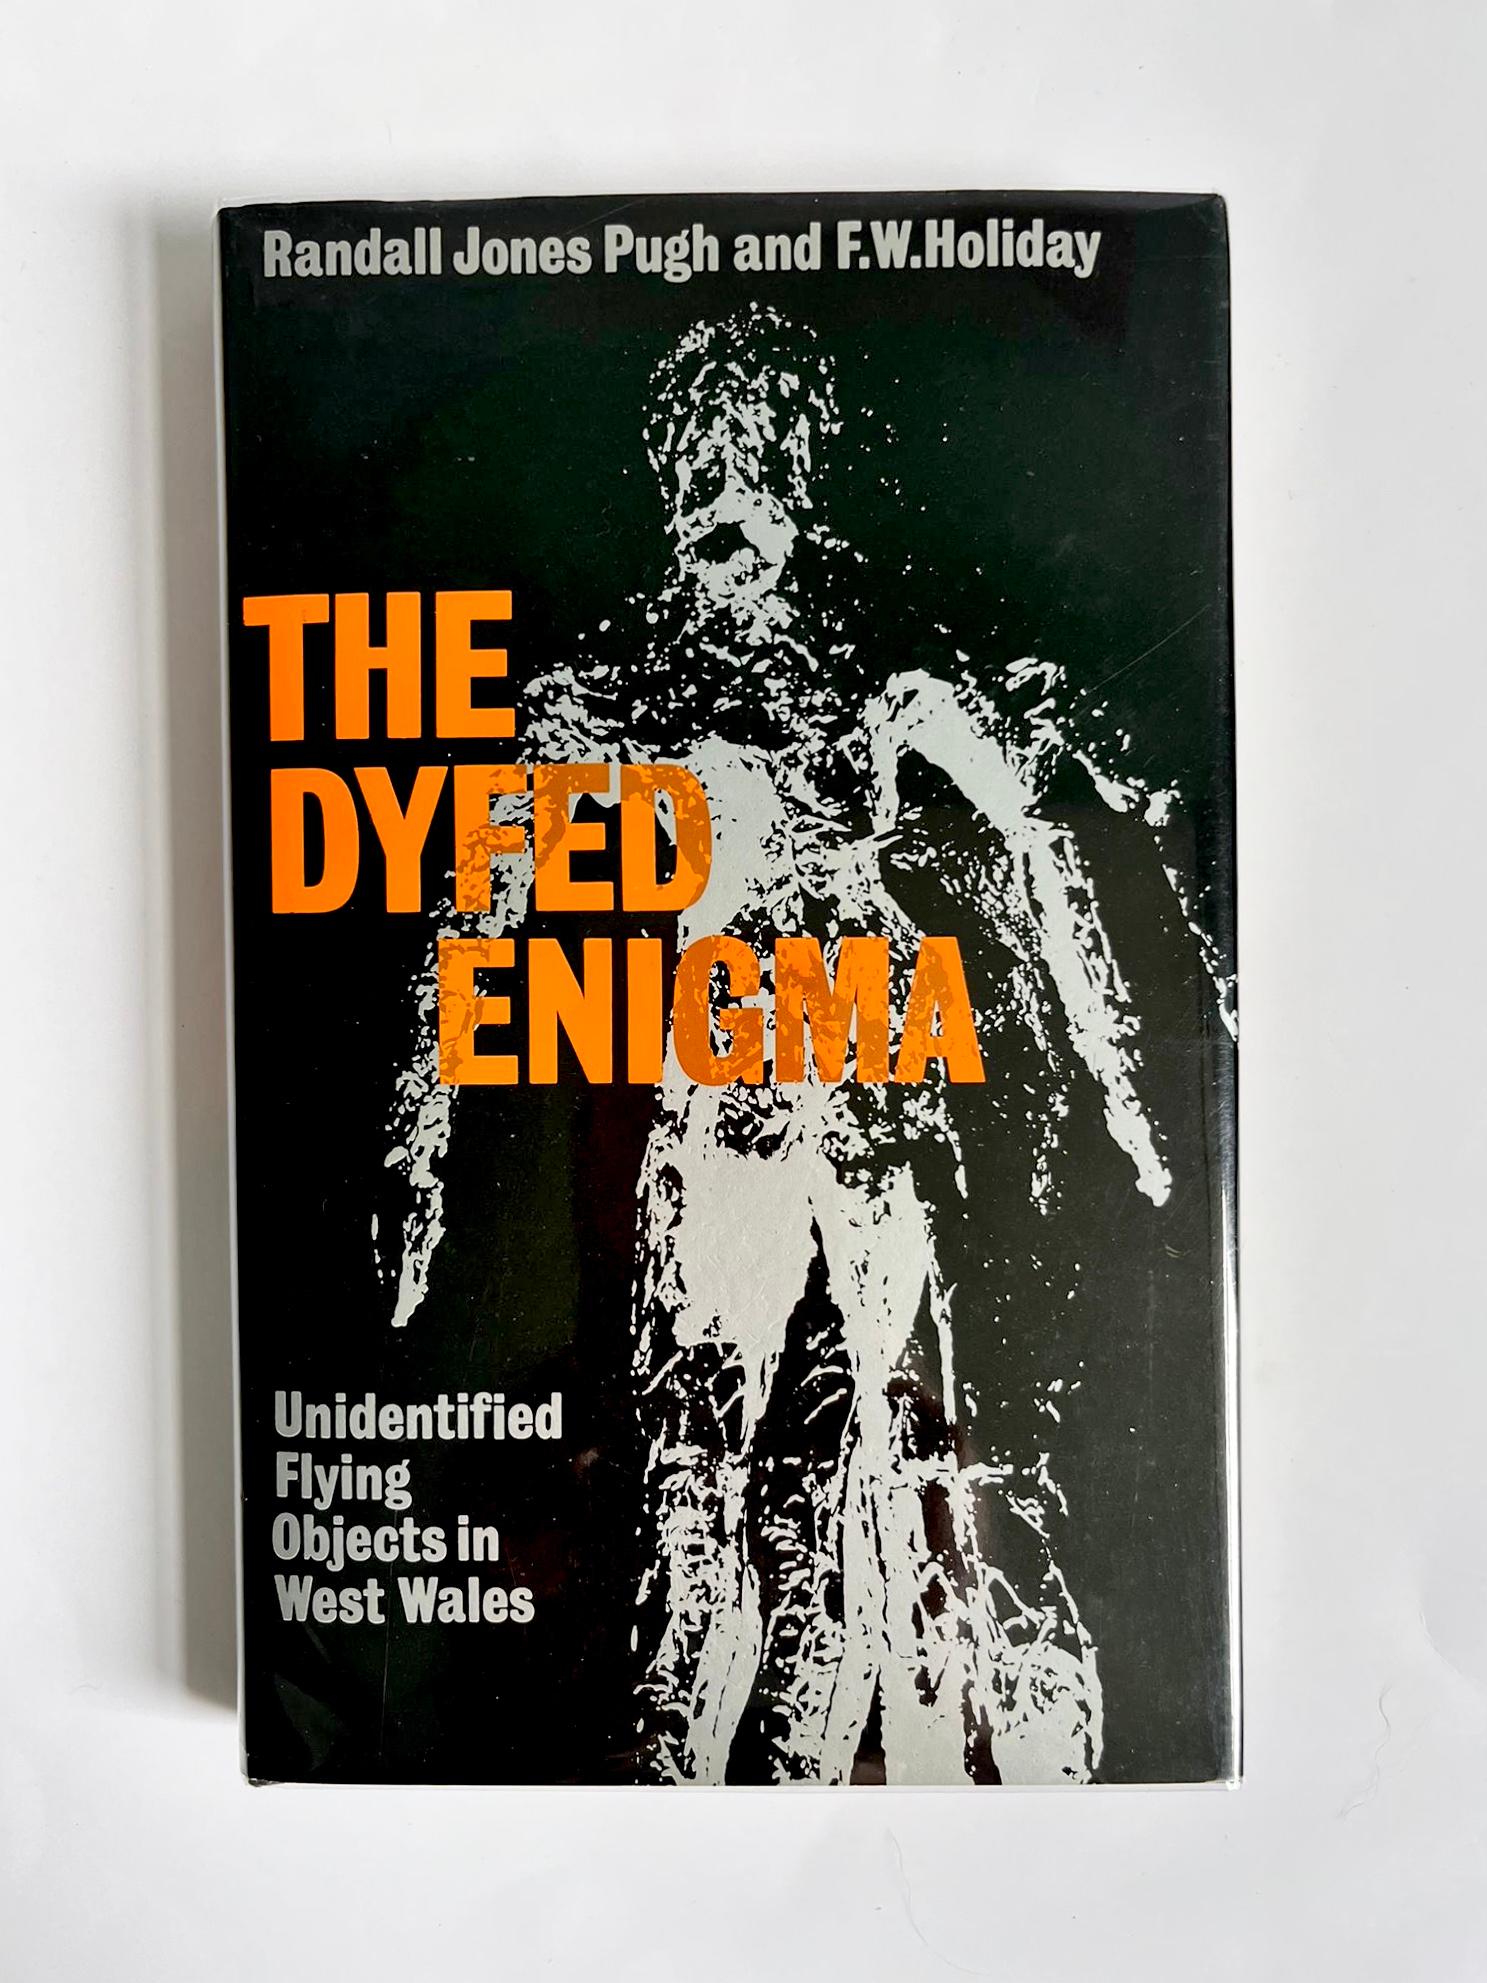 The Dyfed Enigma: Unidentified Flying Objects In West Wales by R. J. Pugh & F. W Holiday